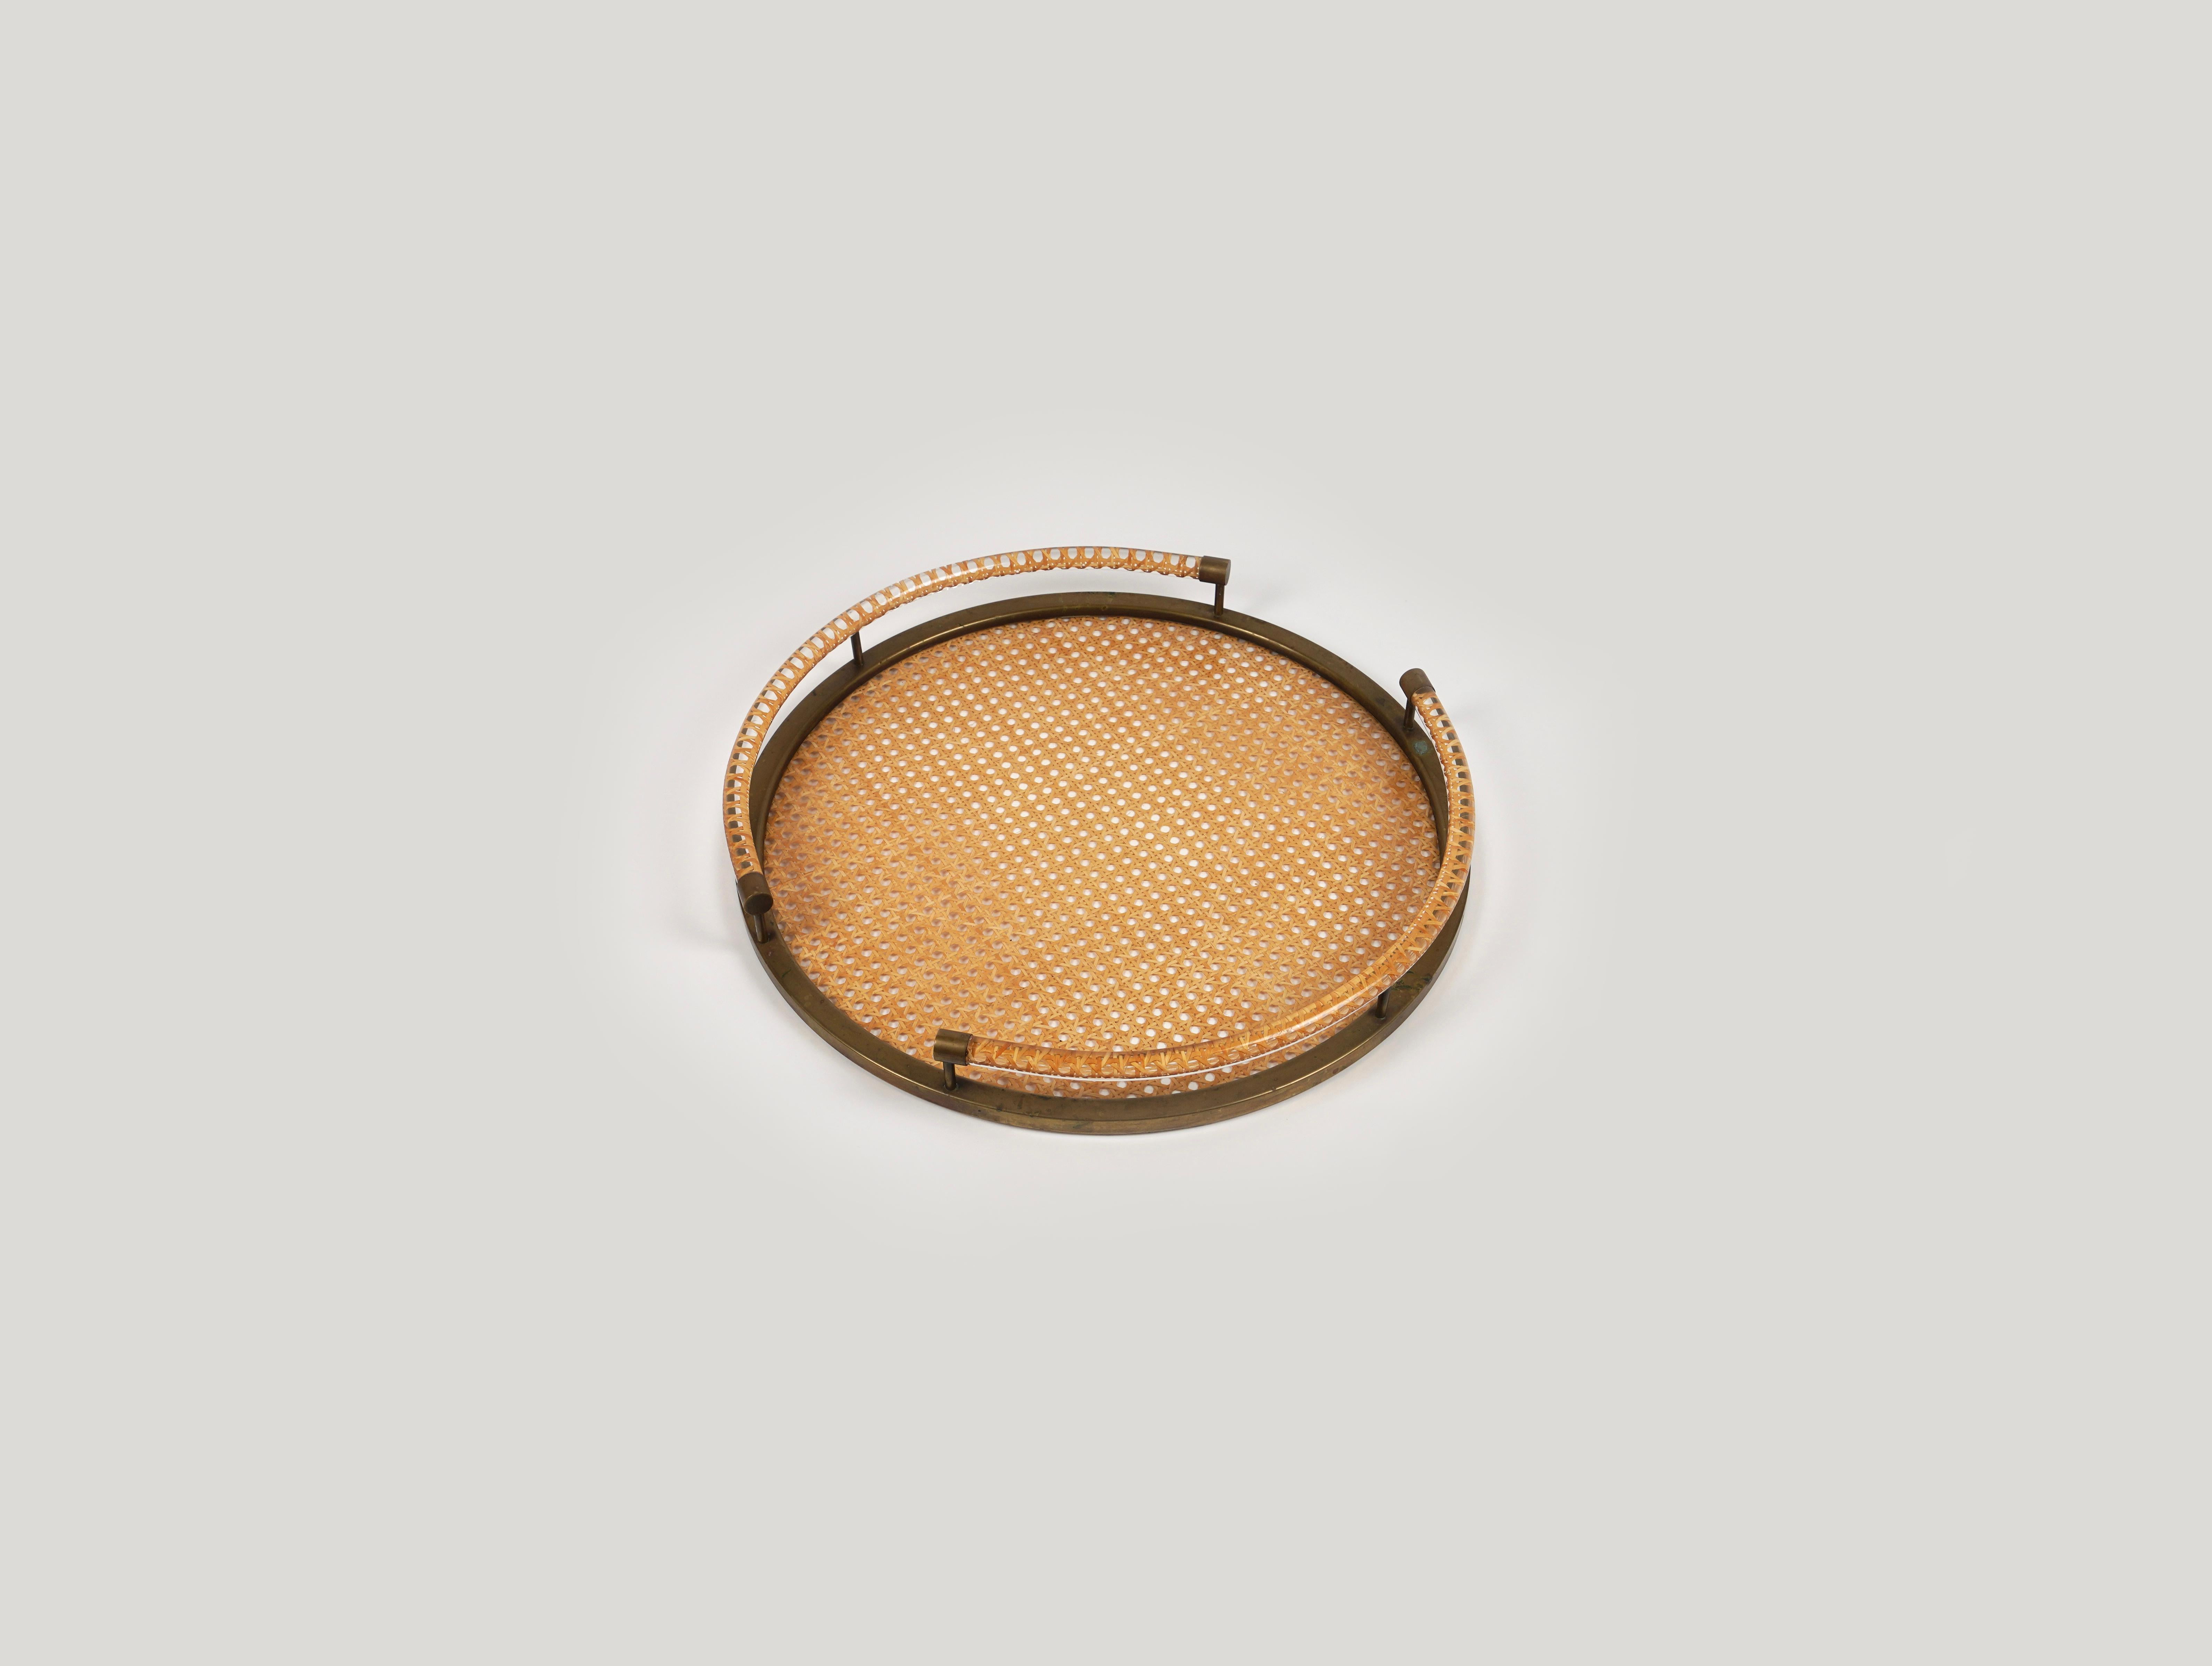 Late 20th Century Round Serving Tray in Lucite, Rattan and Brass Christian Dior Style, Italy 1970s